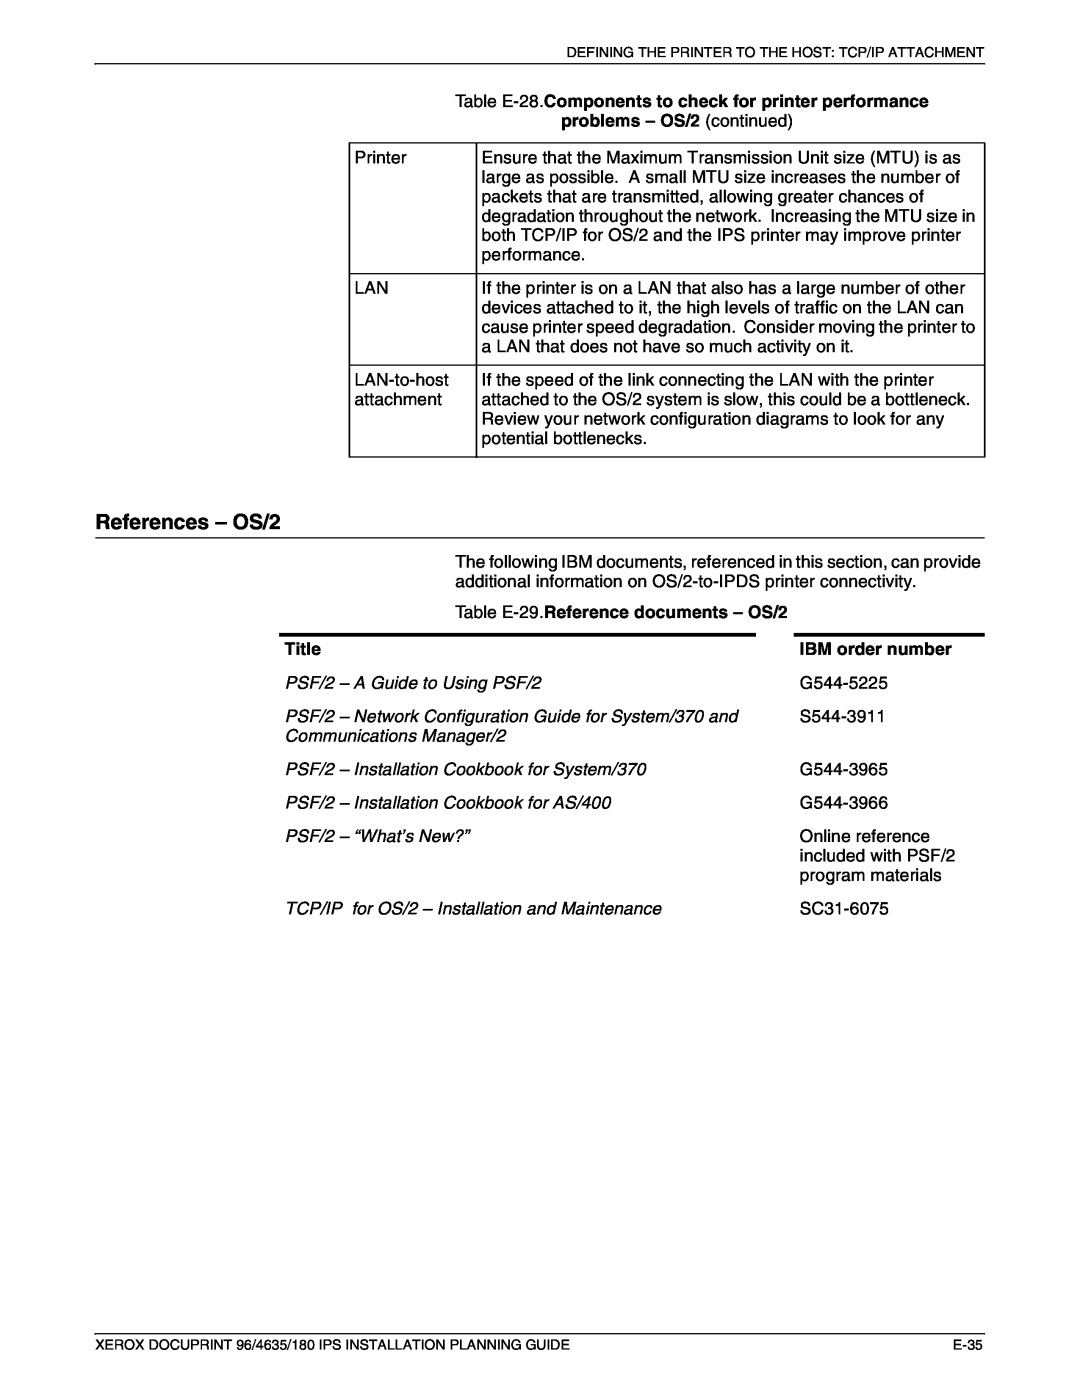 Xerox 180 IPS References – OS/2, problems – OS/2 continued, Table E-29.Referencedocuments – OS/2, Communications Manager/2 